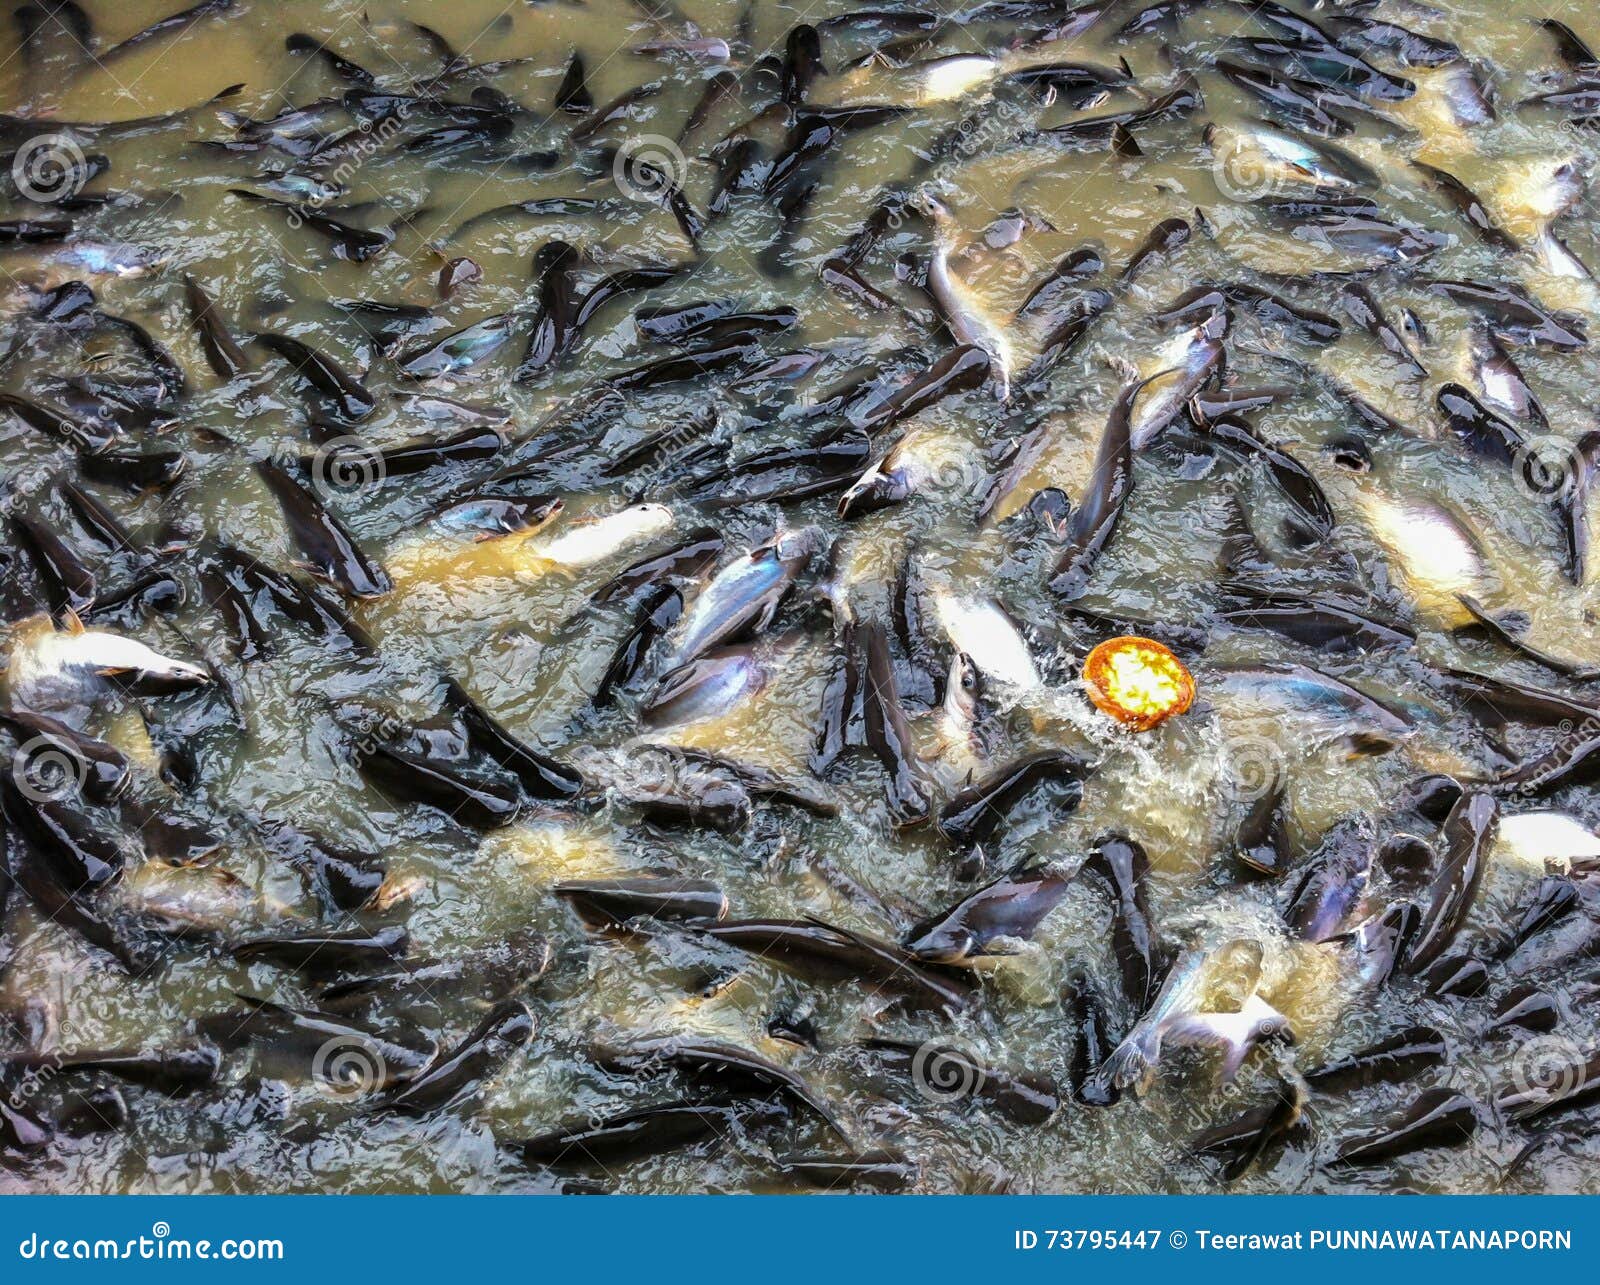 Many Fishes are Hunting Food in the River Stock Image - Image of